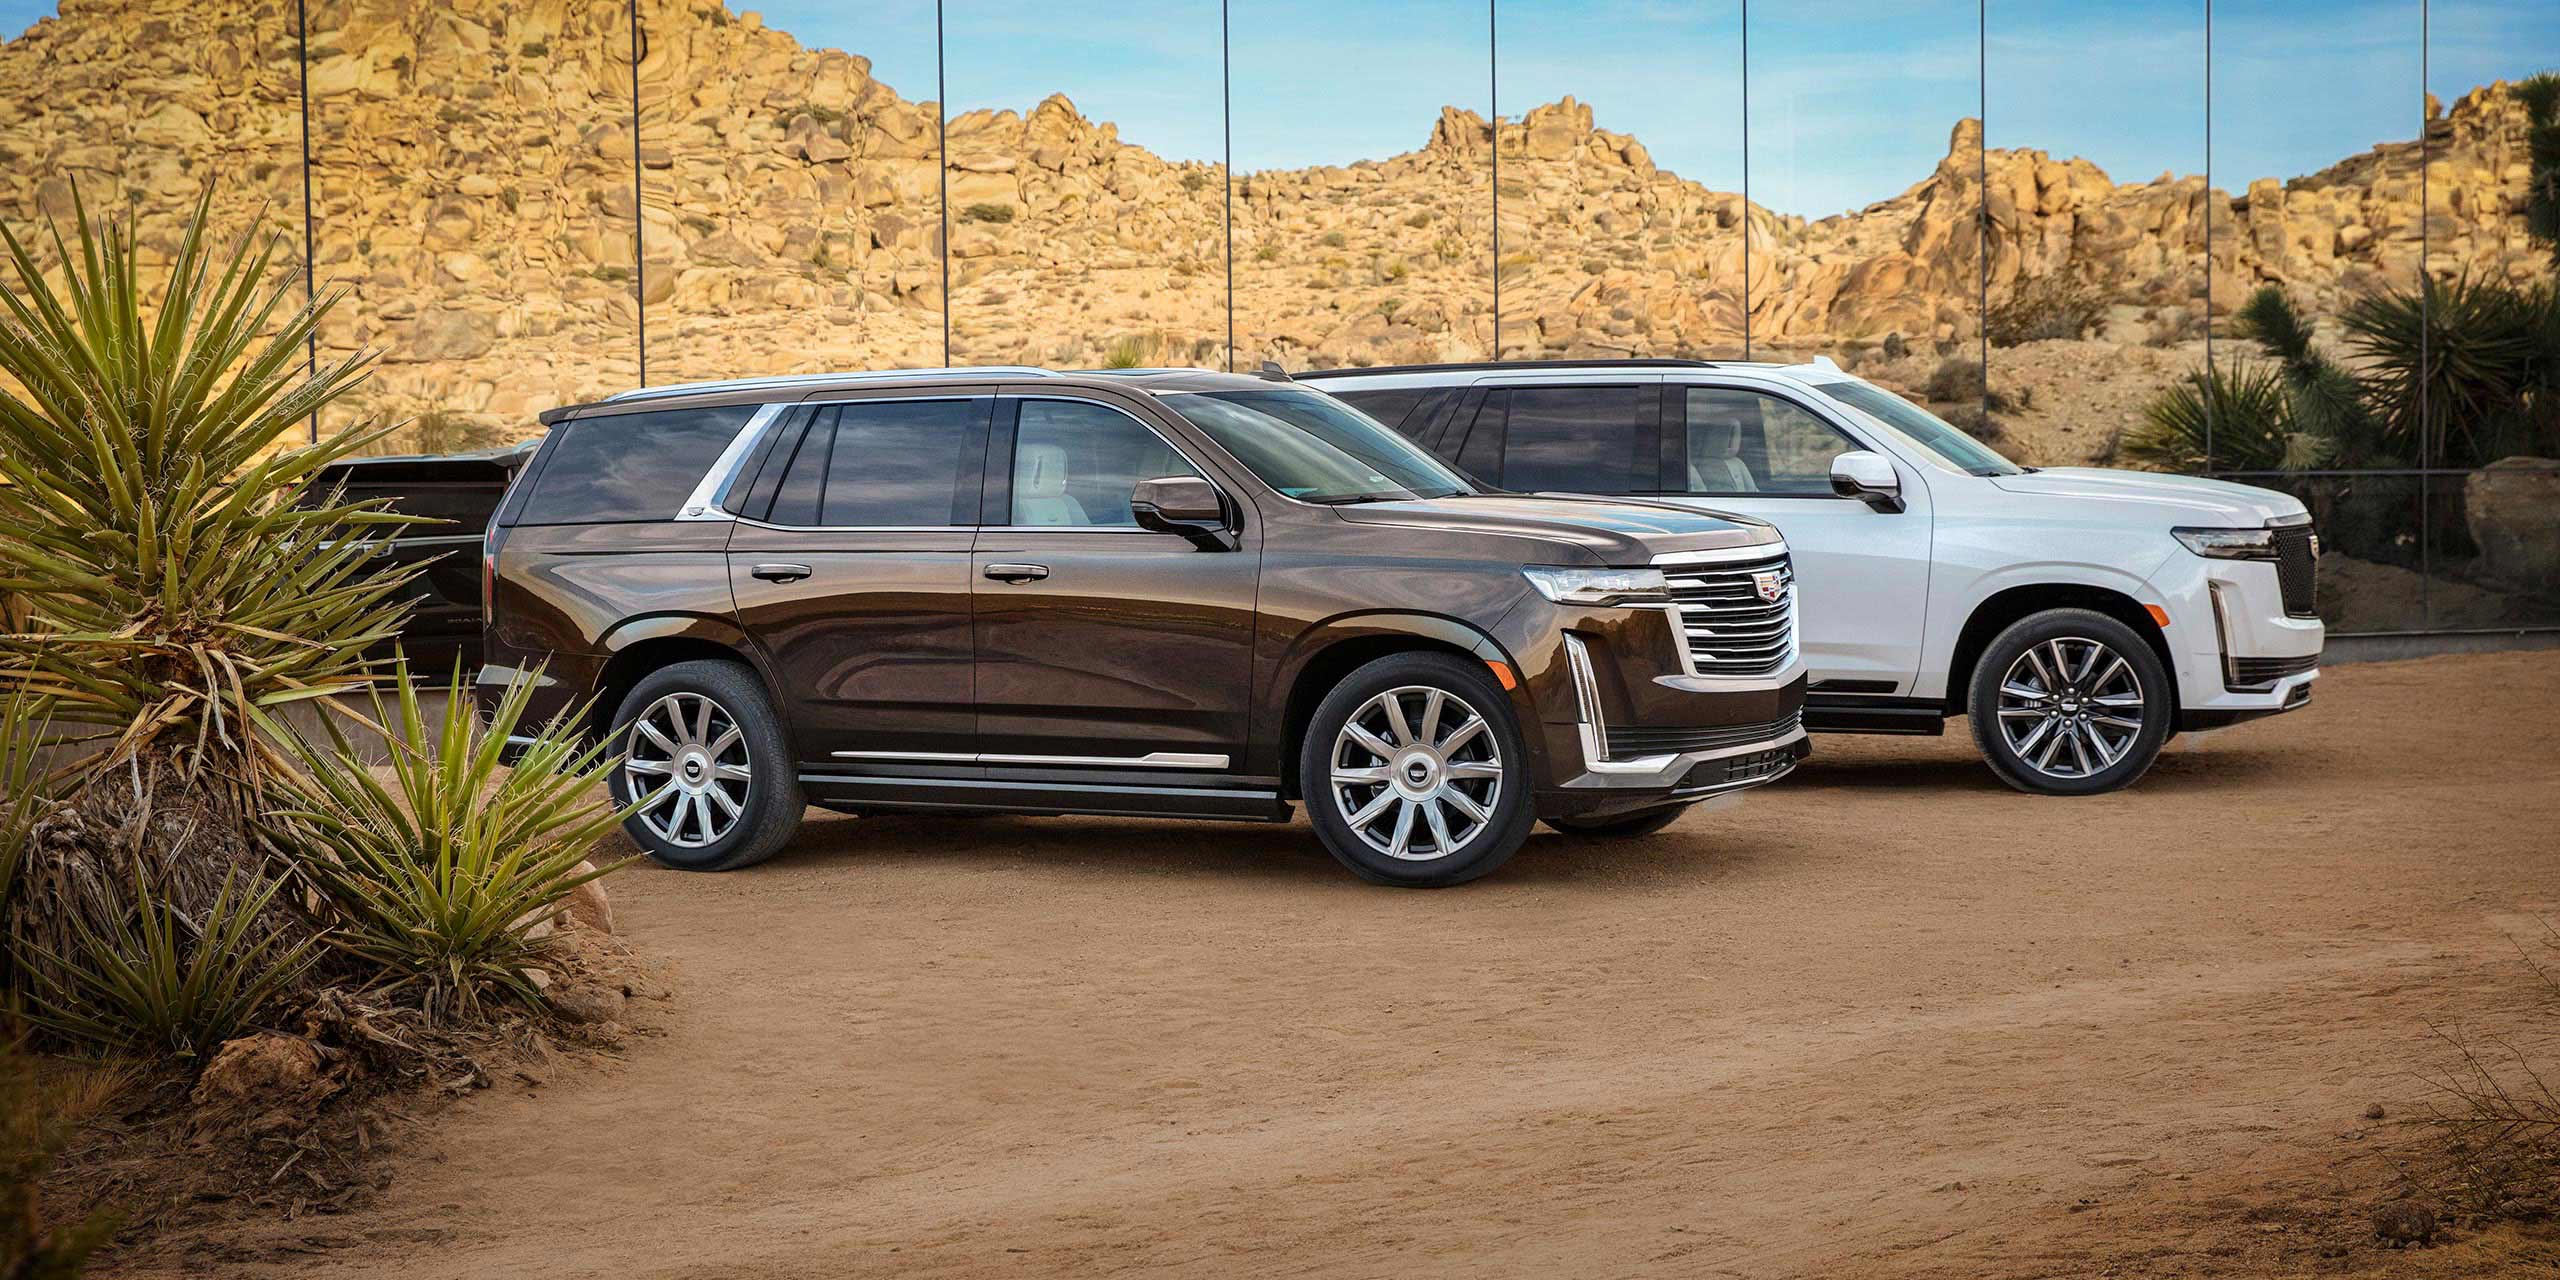 Cadillac unveils the tech-laden Escalade 2021 with Super Cruise and a 38-inch curved OLED screen